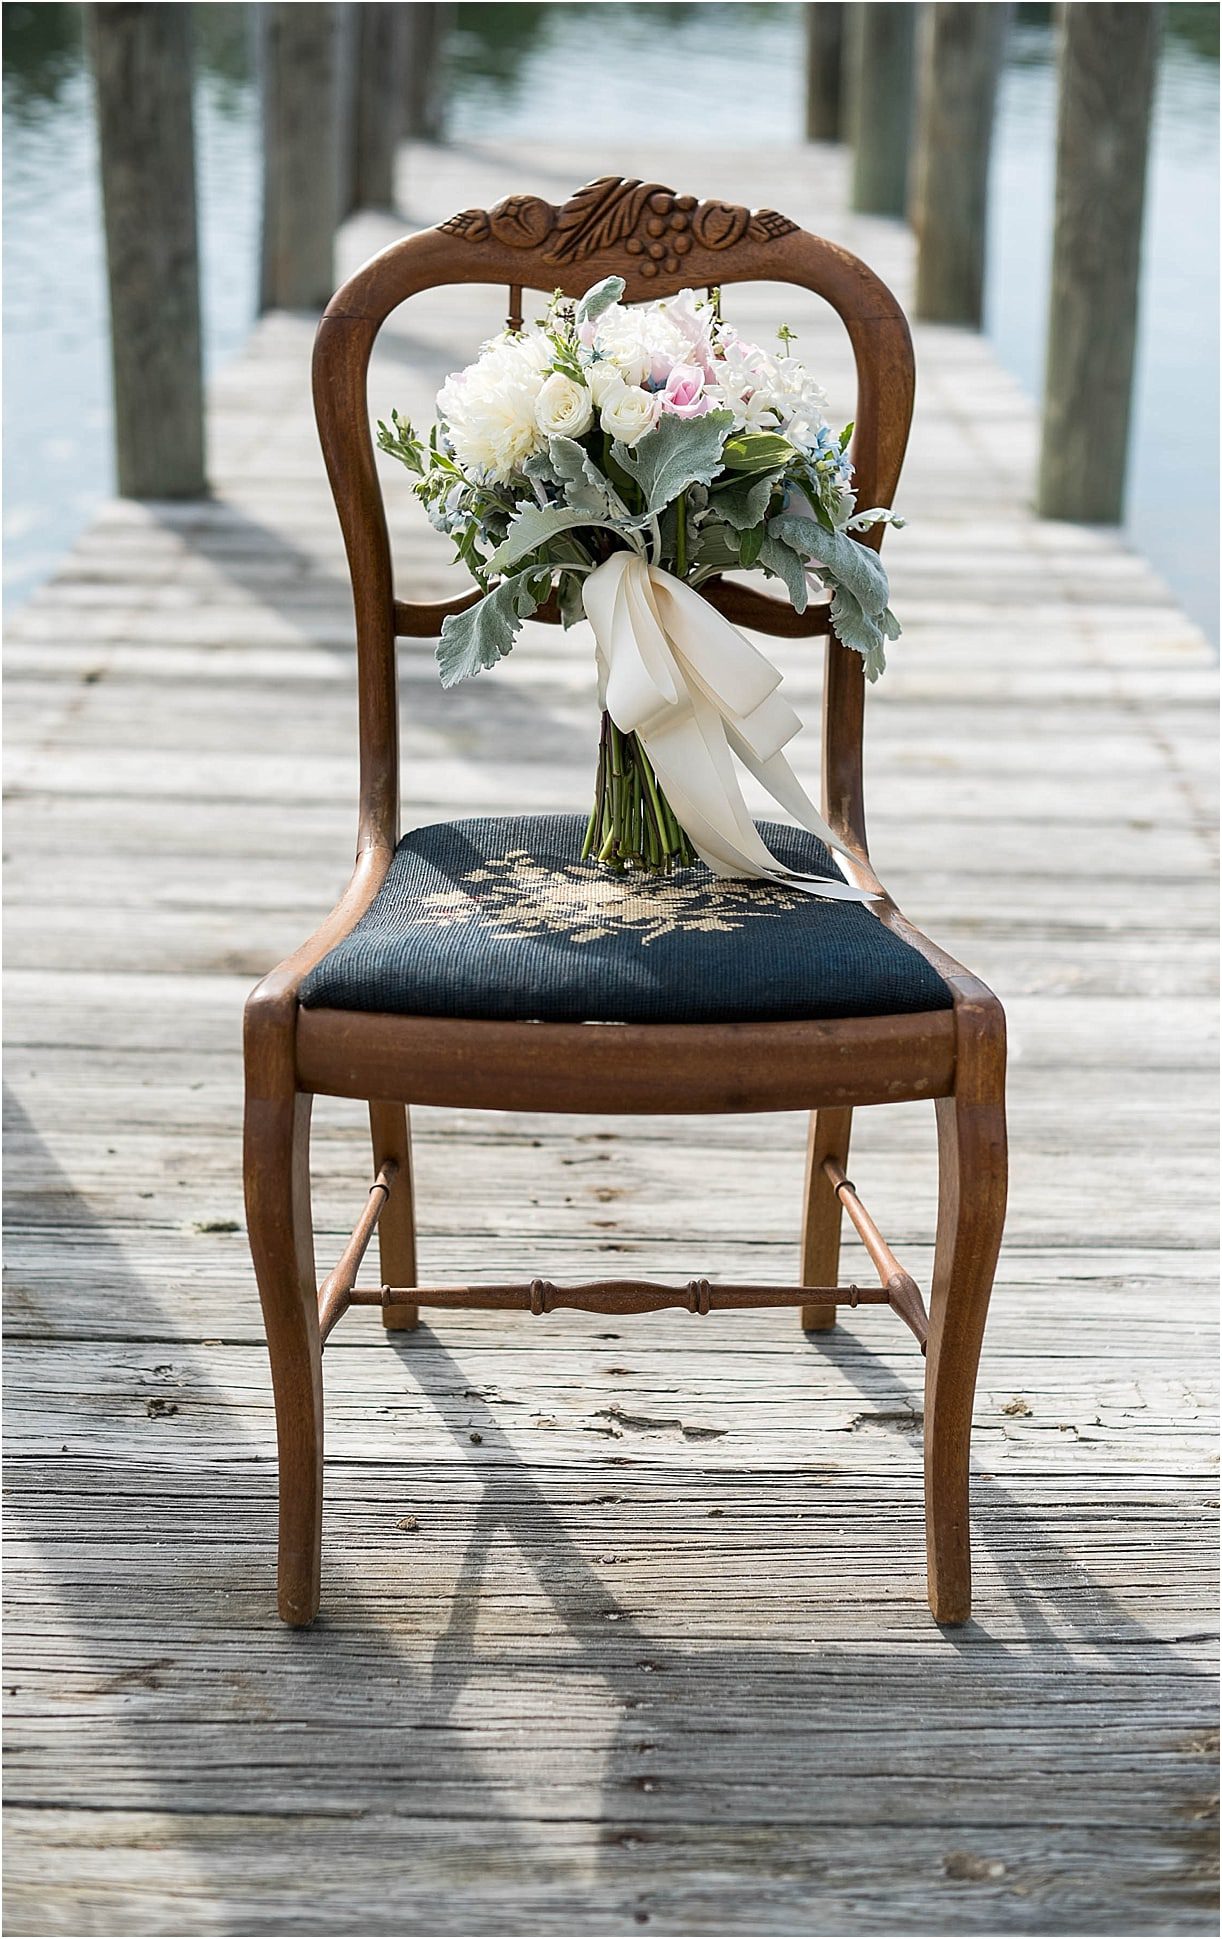 The Tides Inn Virginia Wedding Inspiration as seen on Hill City Bride Blog by Will Hawkins Photography - bouquet, chair